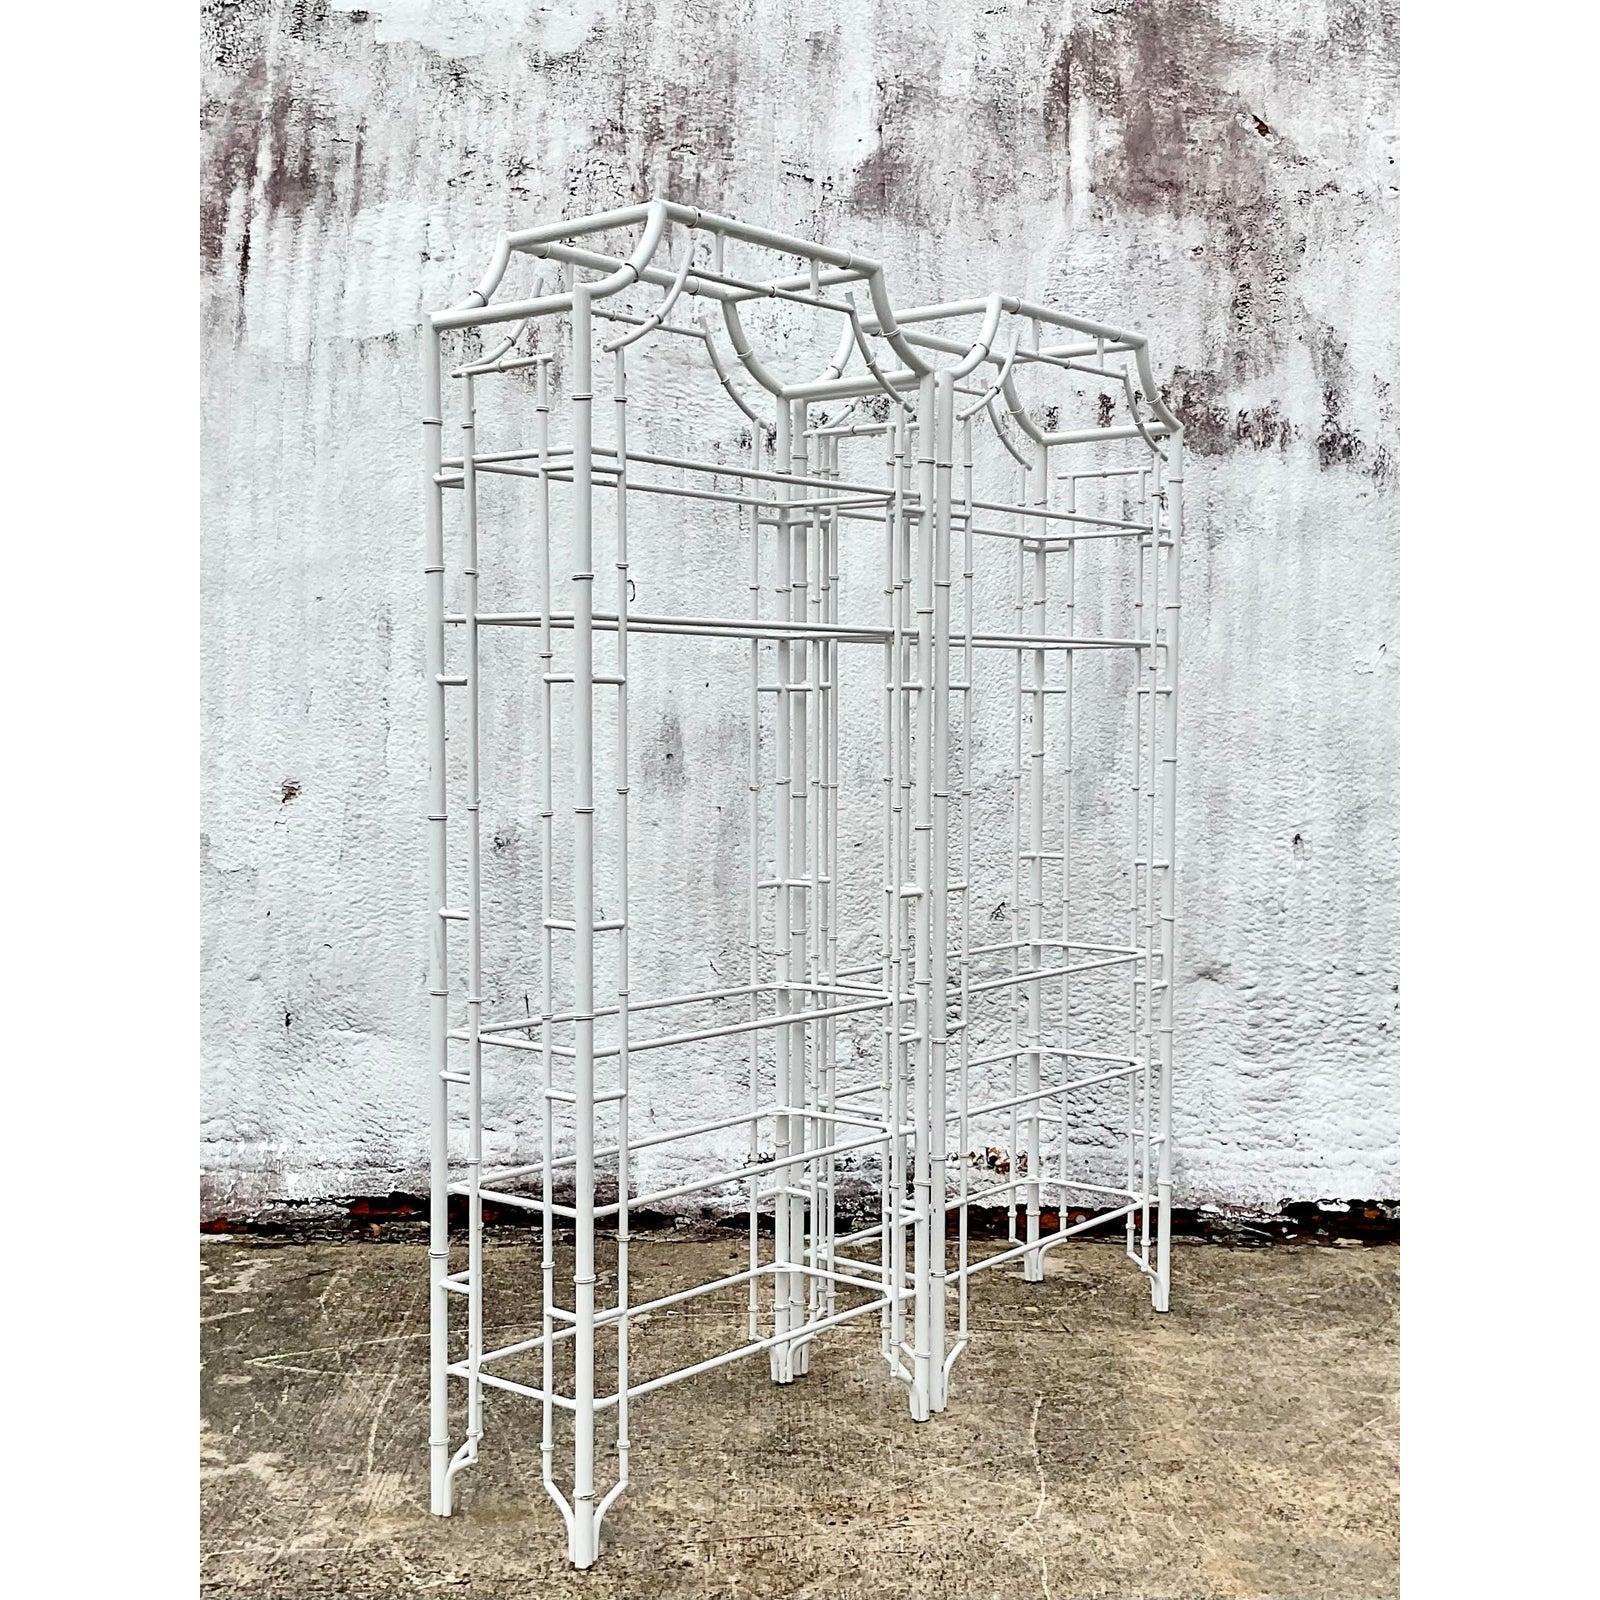 Fantastic pair of vintage pagoda etagere. Bright white metal in a bamboo design. Inset glass shelves. A chic addition indoors or outside in a covered area. Acquired from a Palm Beach estate.